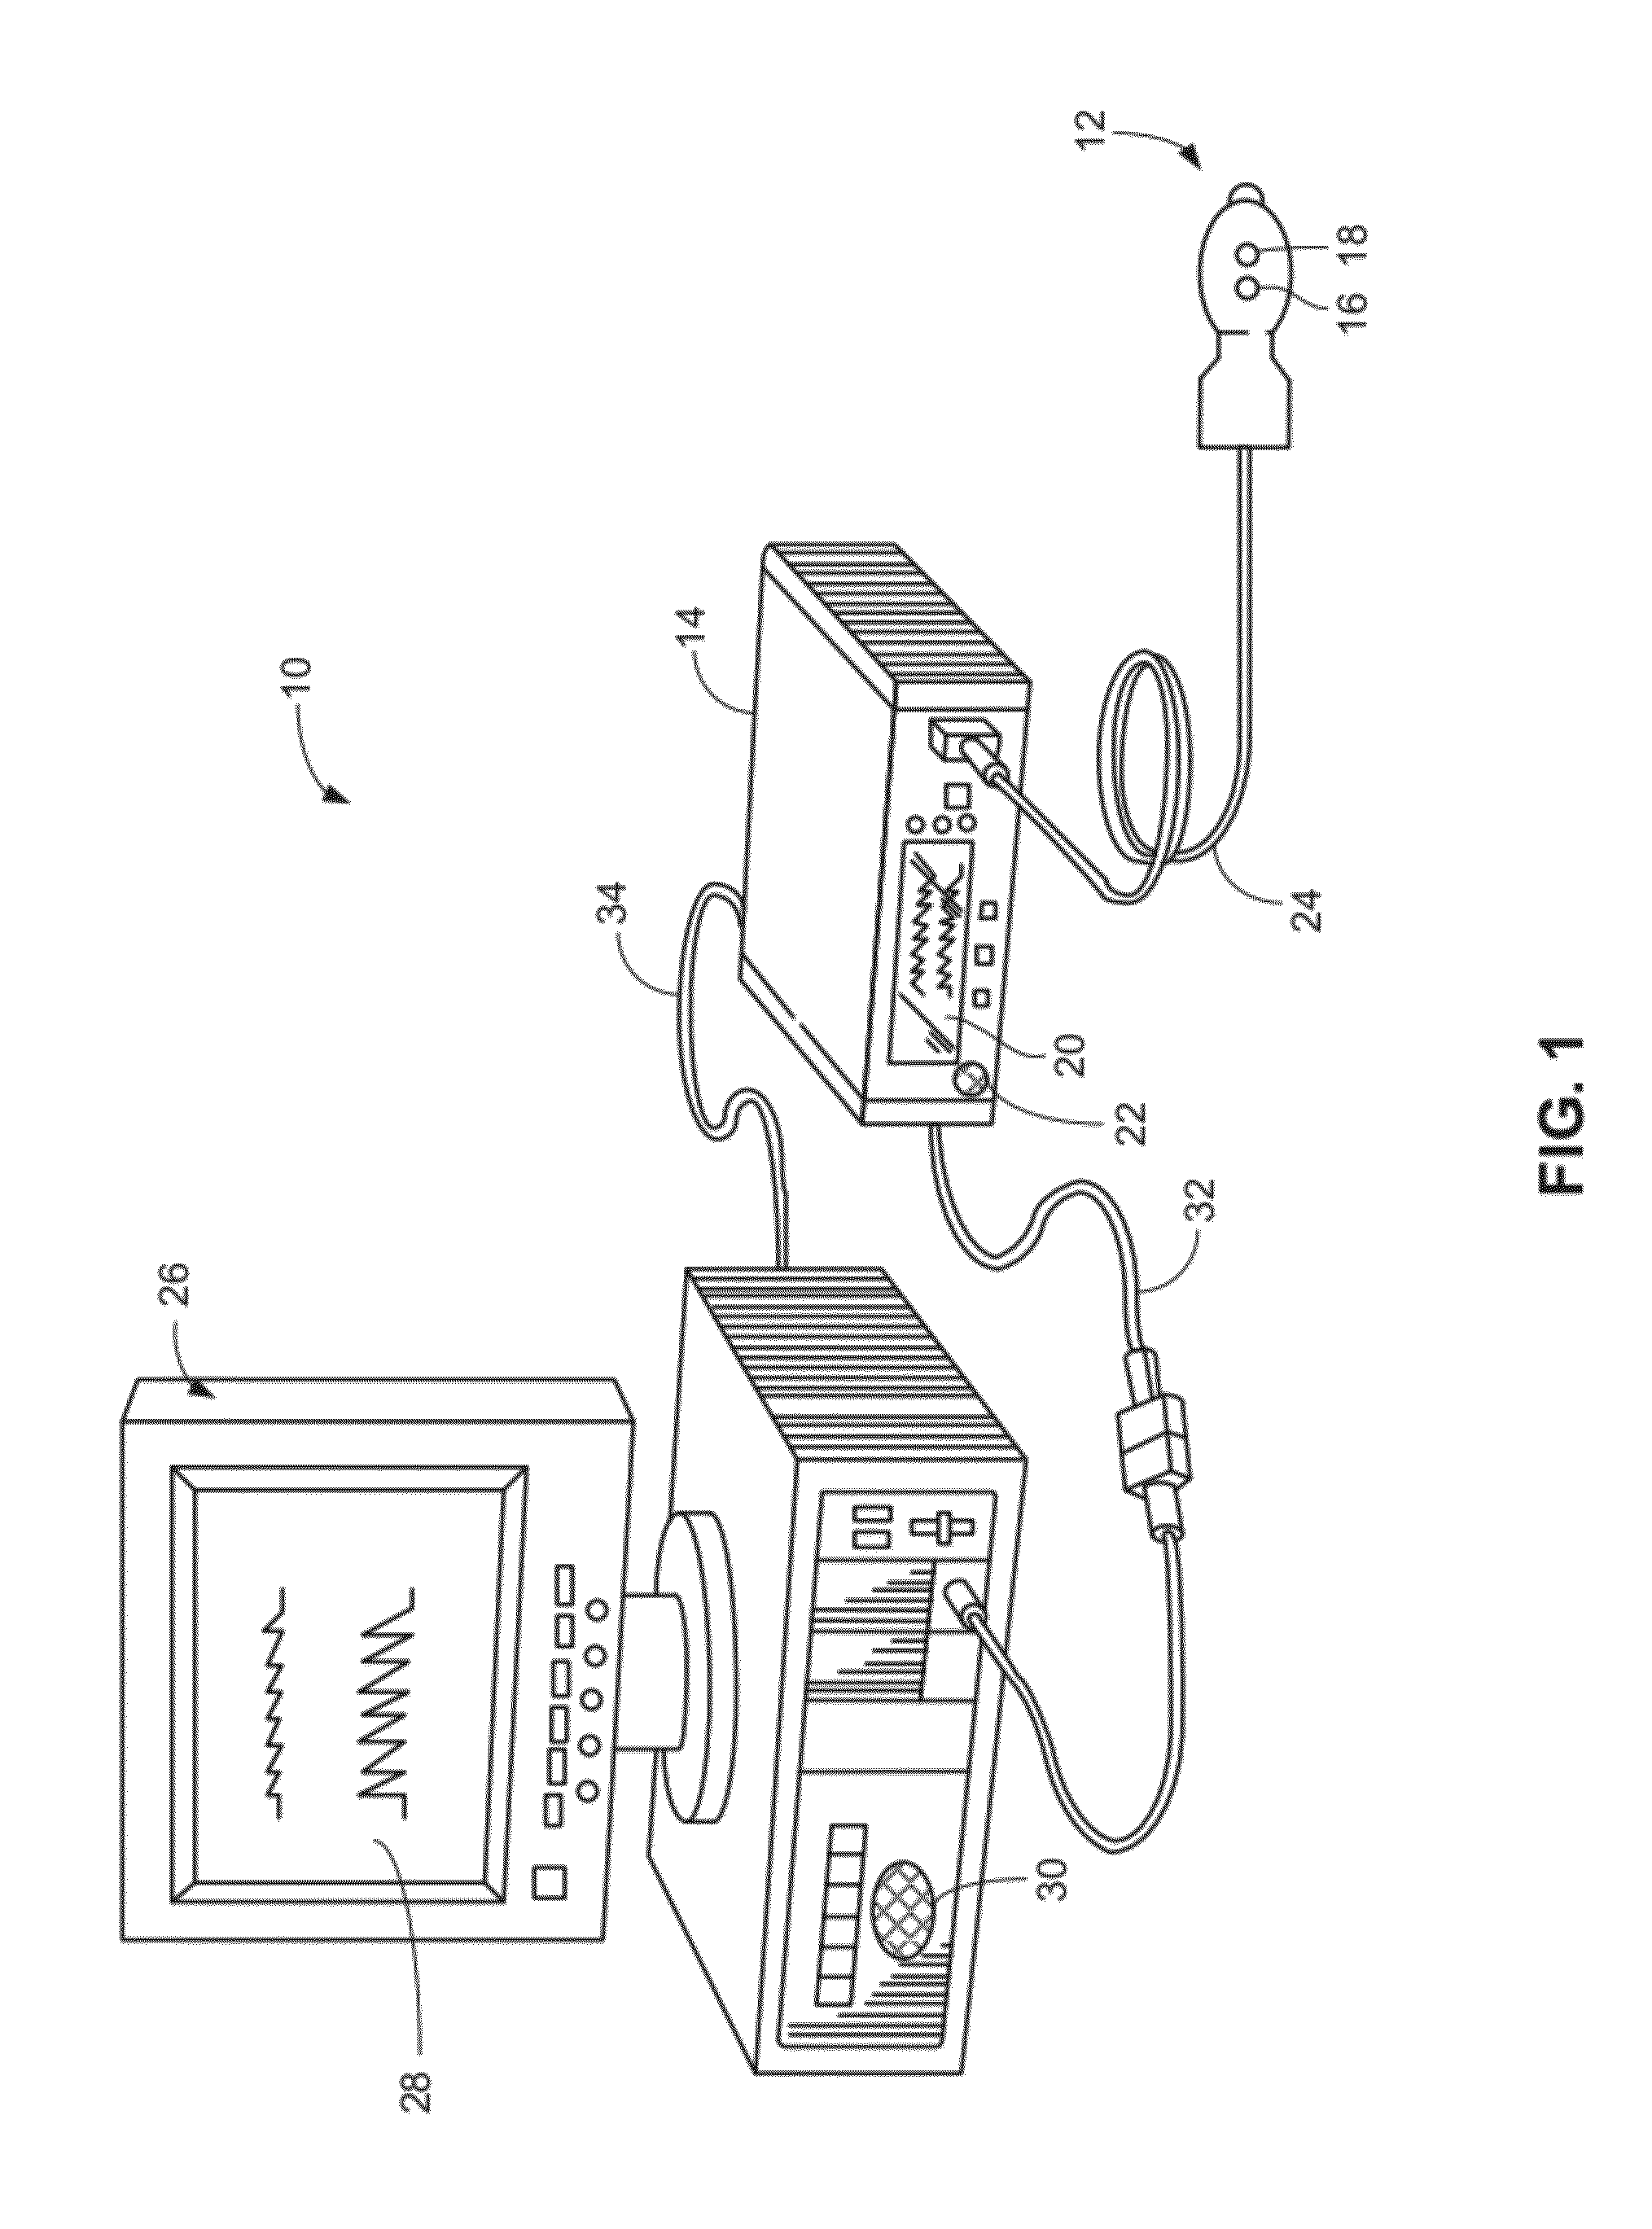 Systems and methods for detecting and monitoring arrhythmias using the PPG